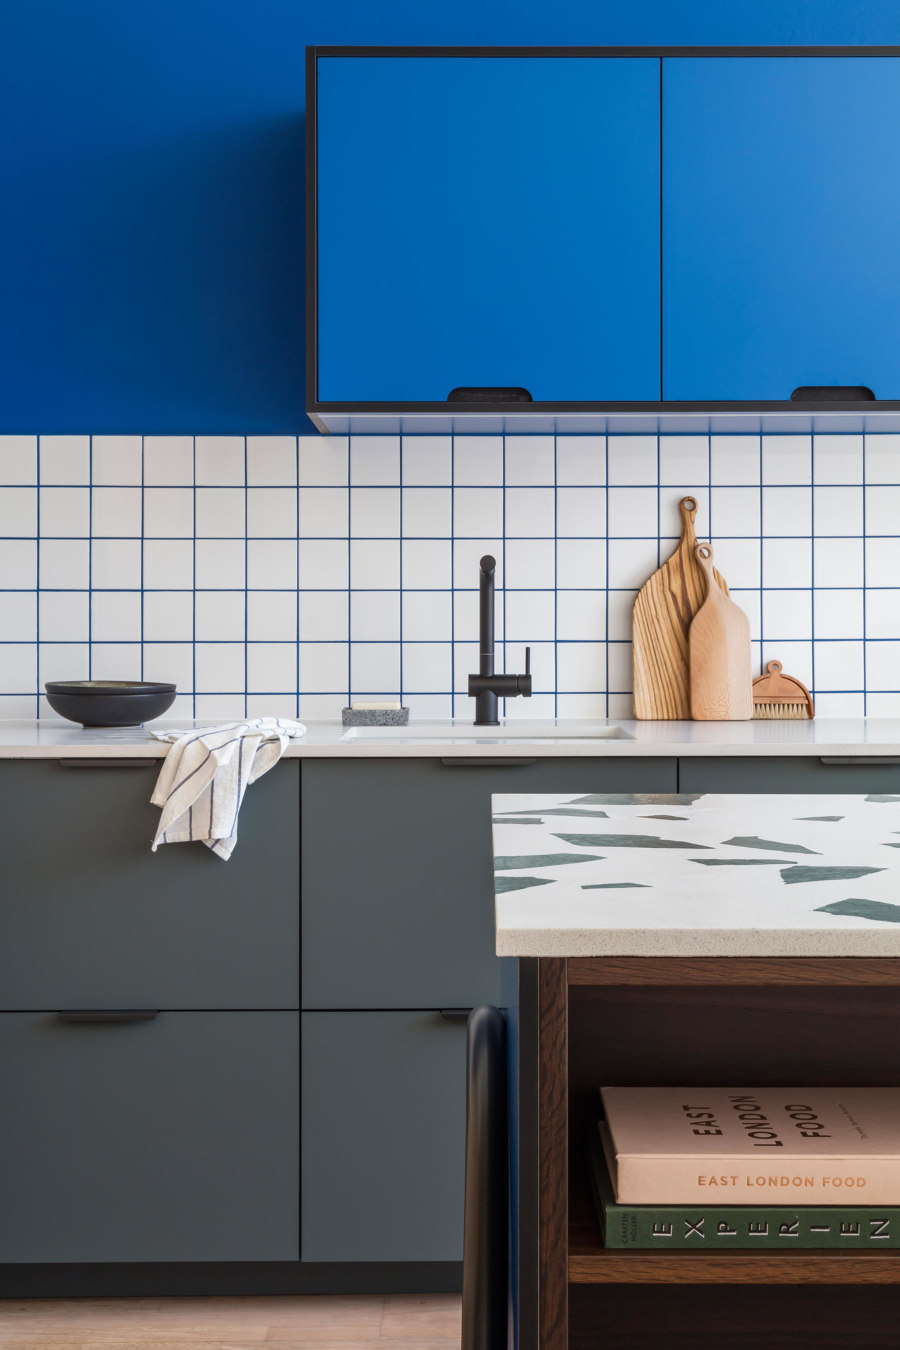 Eight creative material options for a kitchen backsplash | News